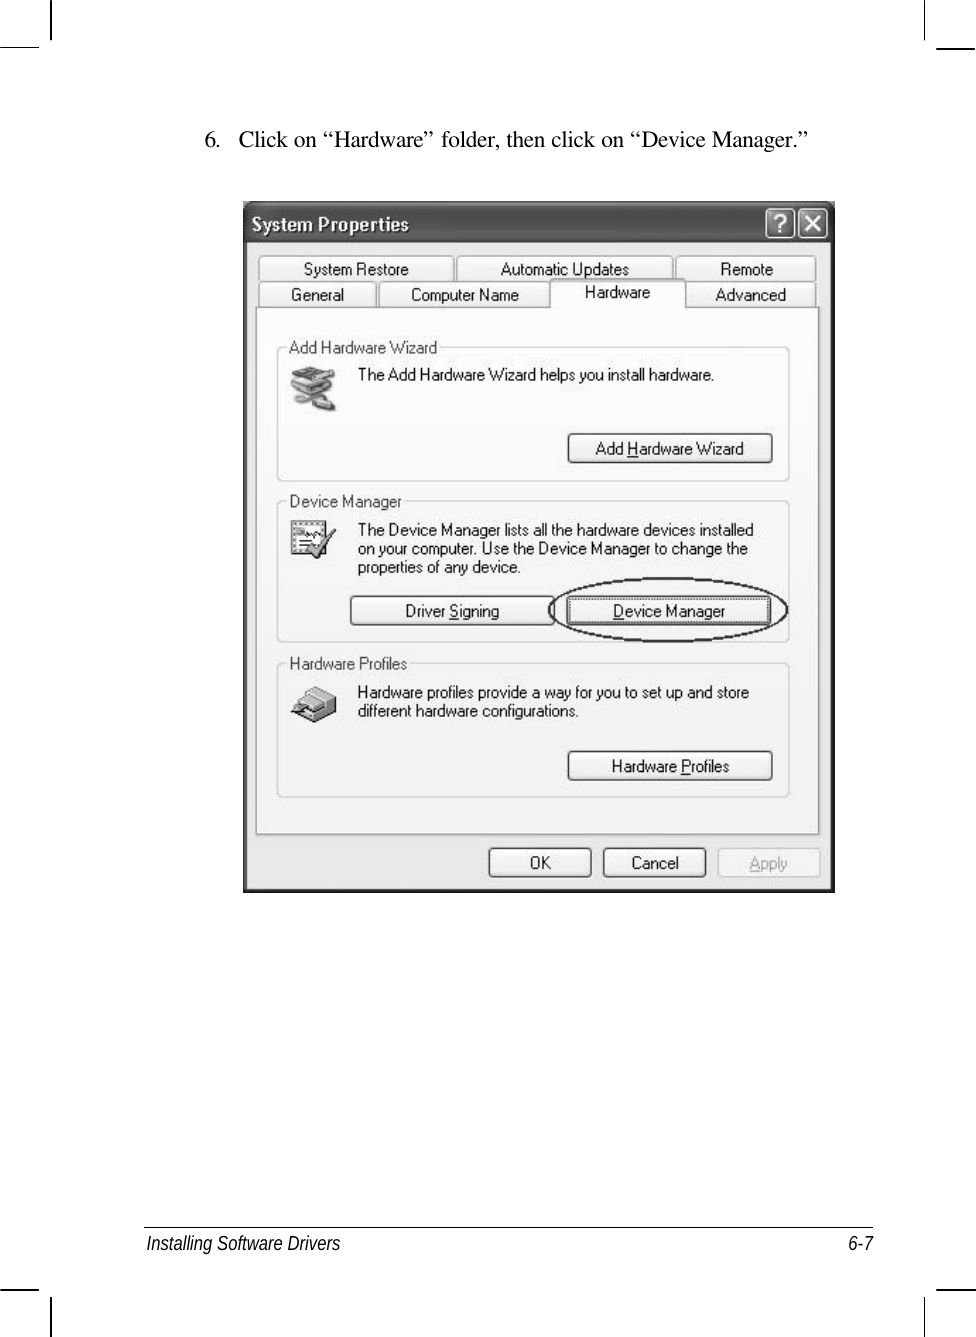  Installing Software Drivers 6-7 6. Click on “Hardware” folder, then click on “Device Manager.”  